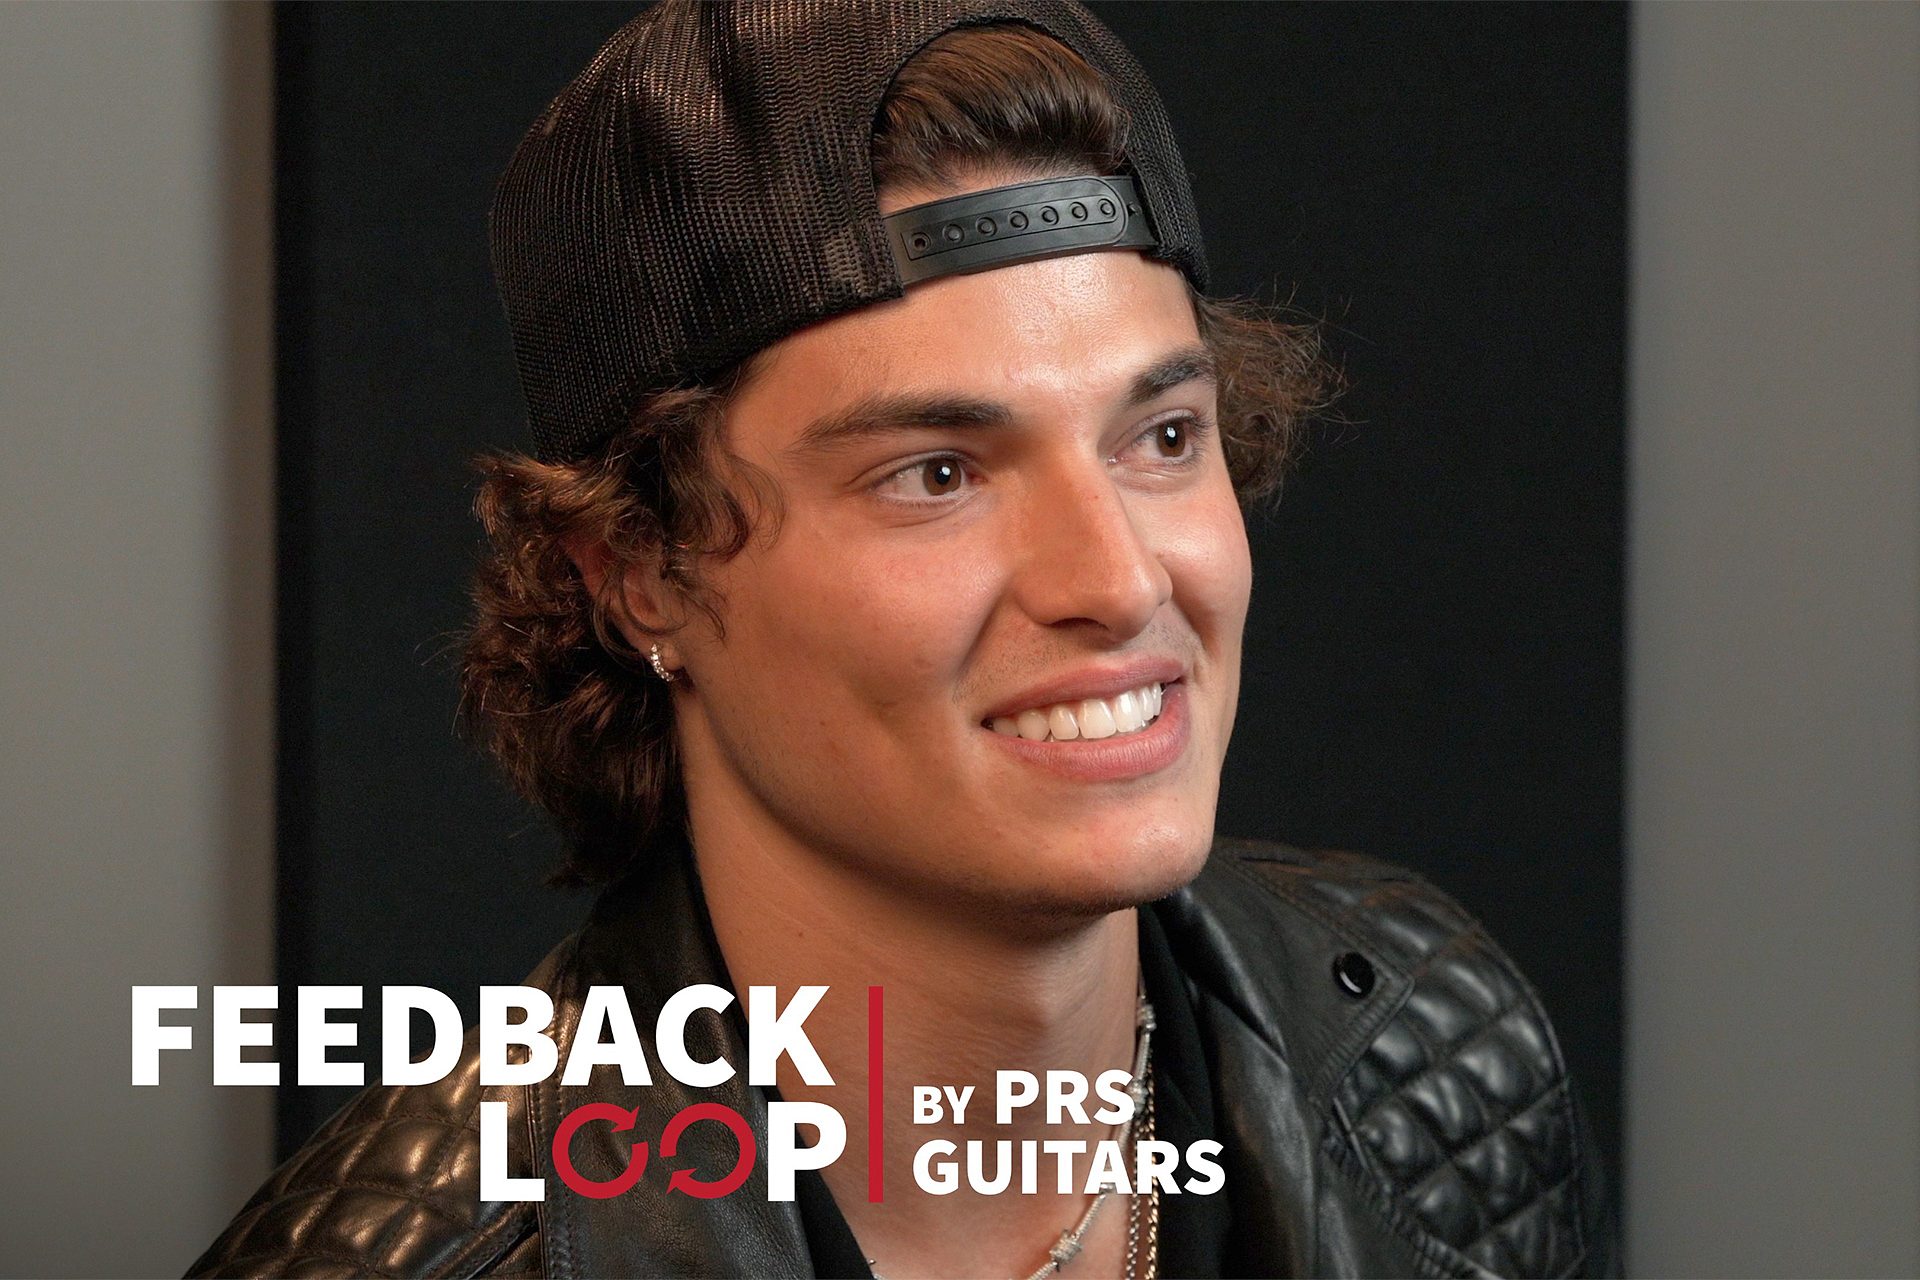 Jon Dretto Answers Tough Questions on Episode of "Feedback Loop"